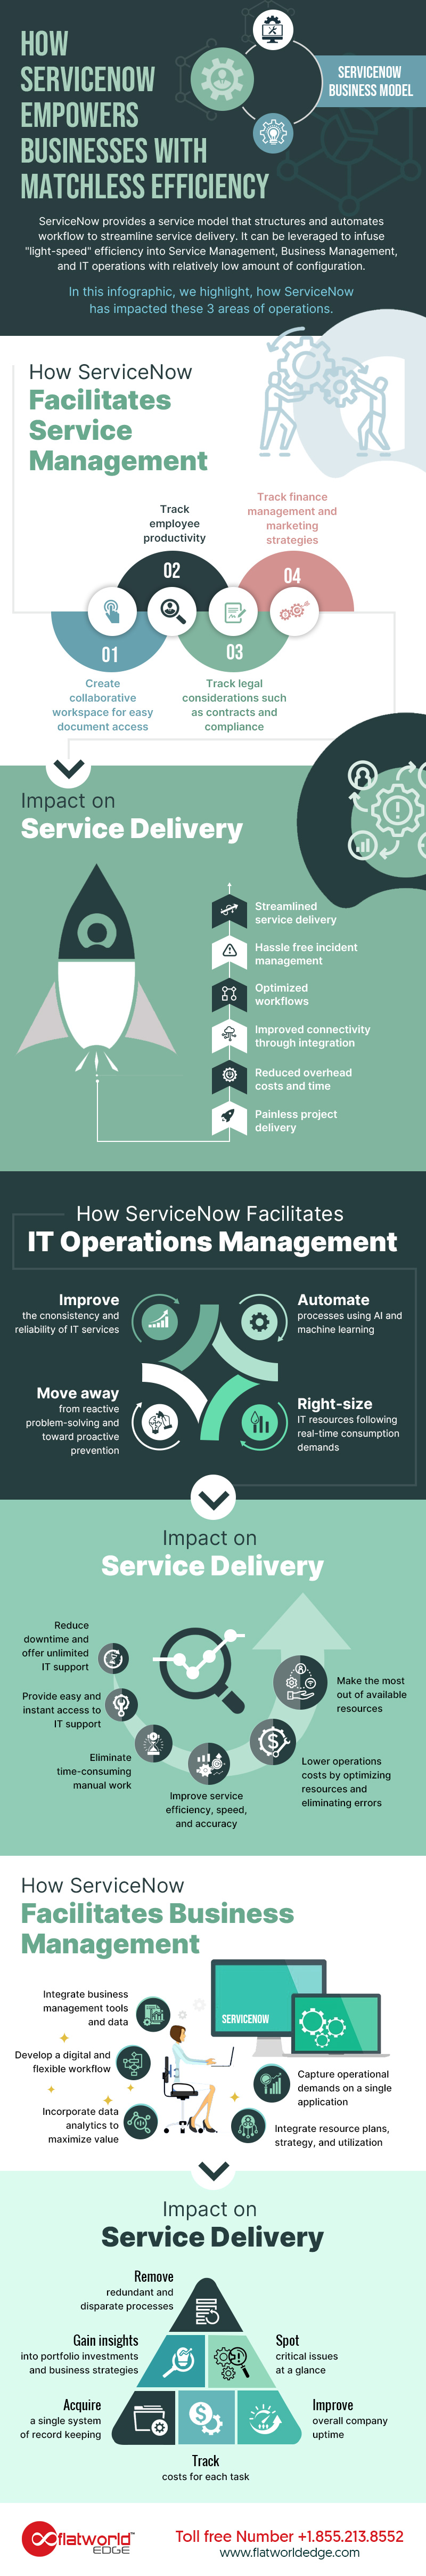 servicenow for IT Operations 